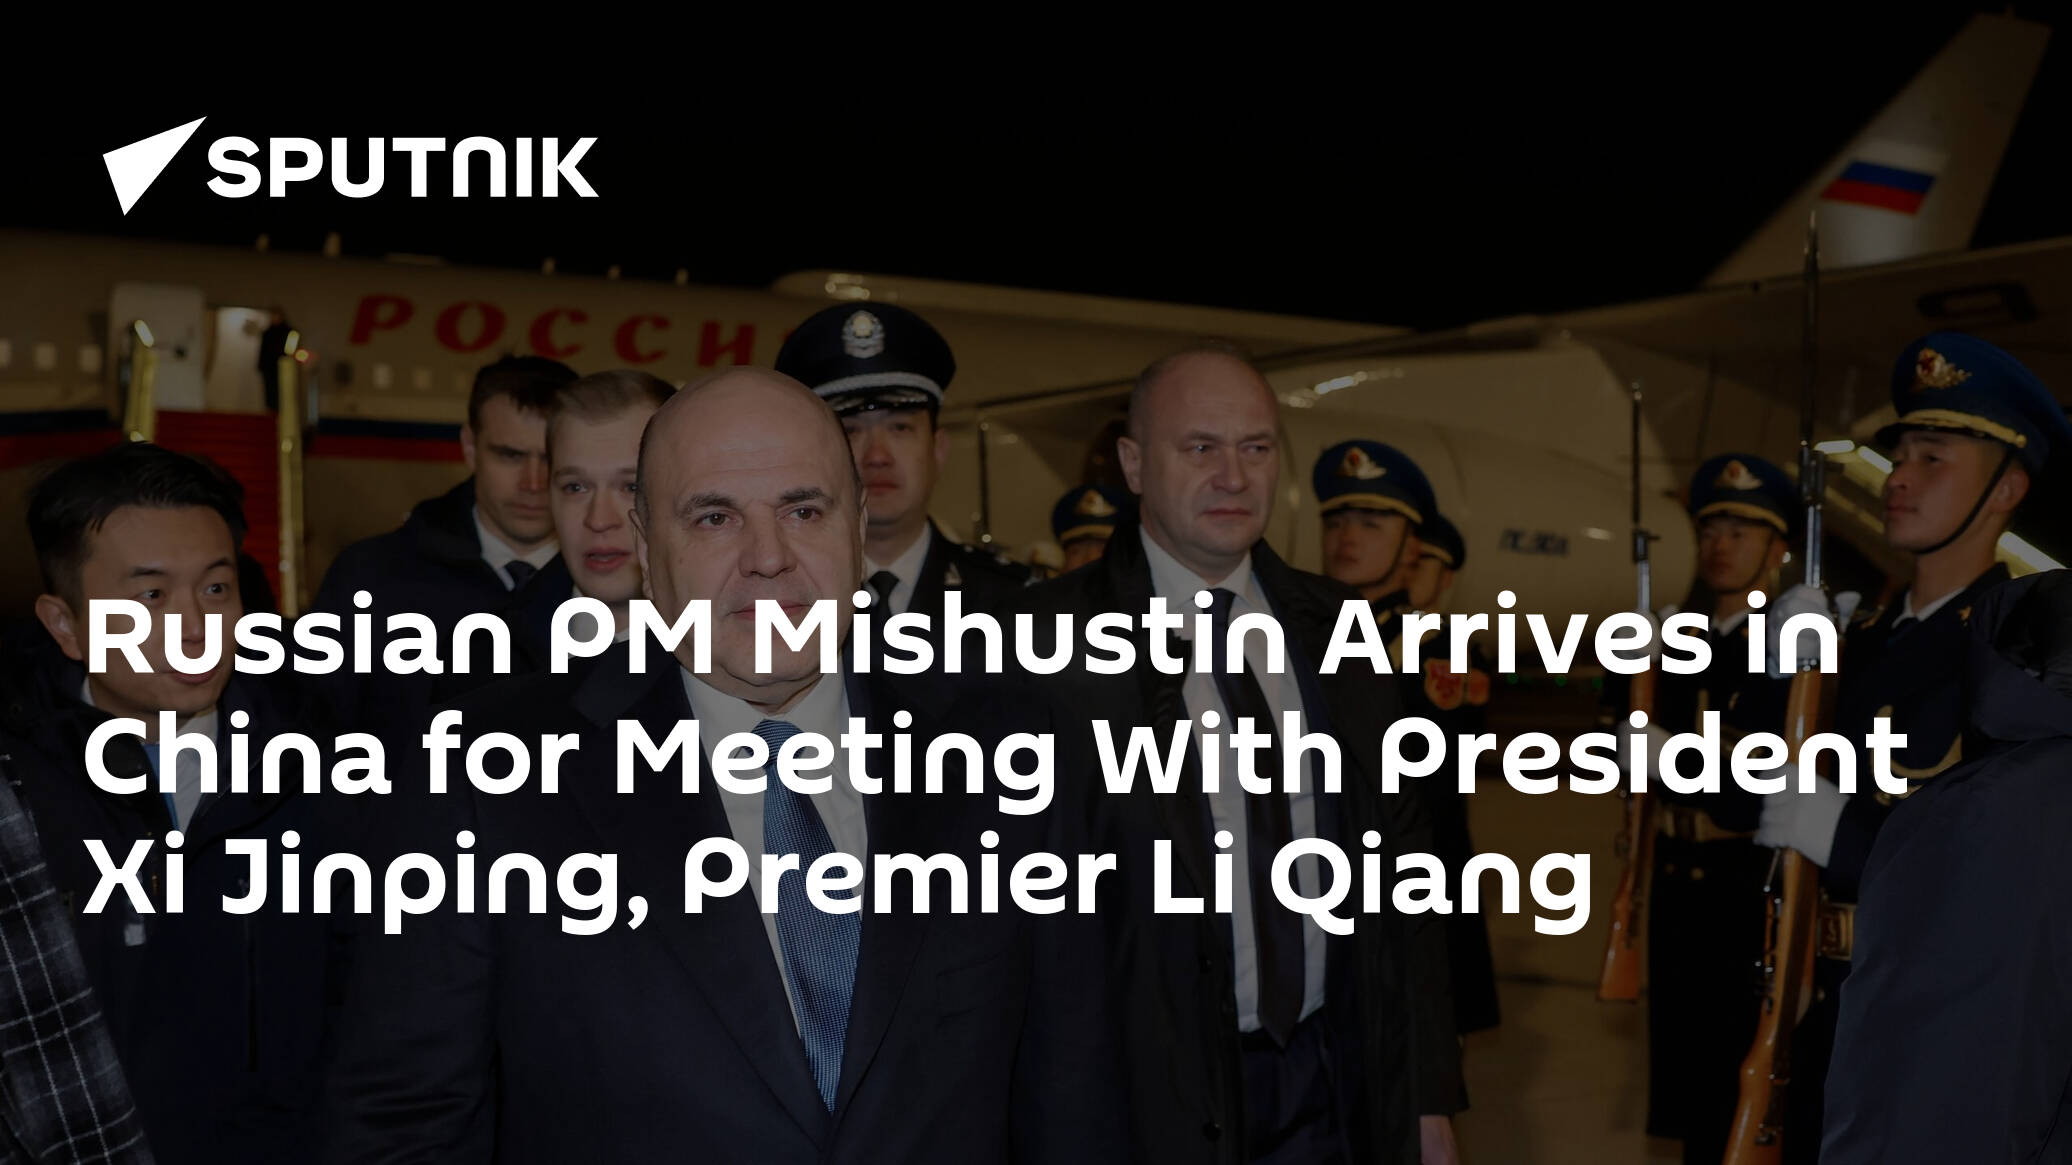 Russian PM Mishustin Arrives in China for Meeting With President Xi Jinping, Premier Li Qiang